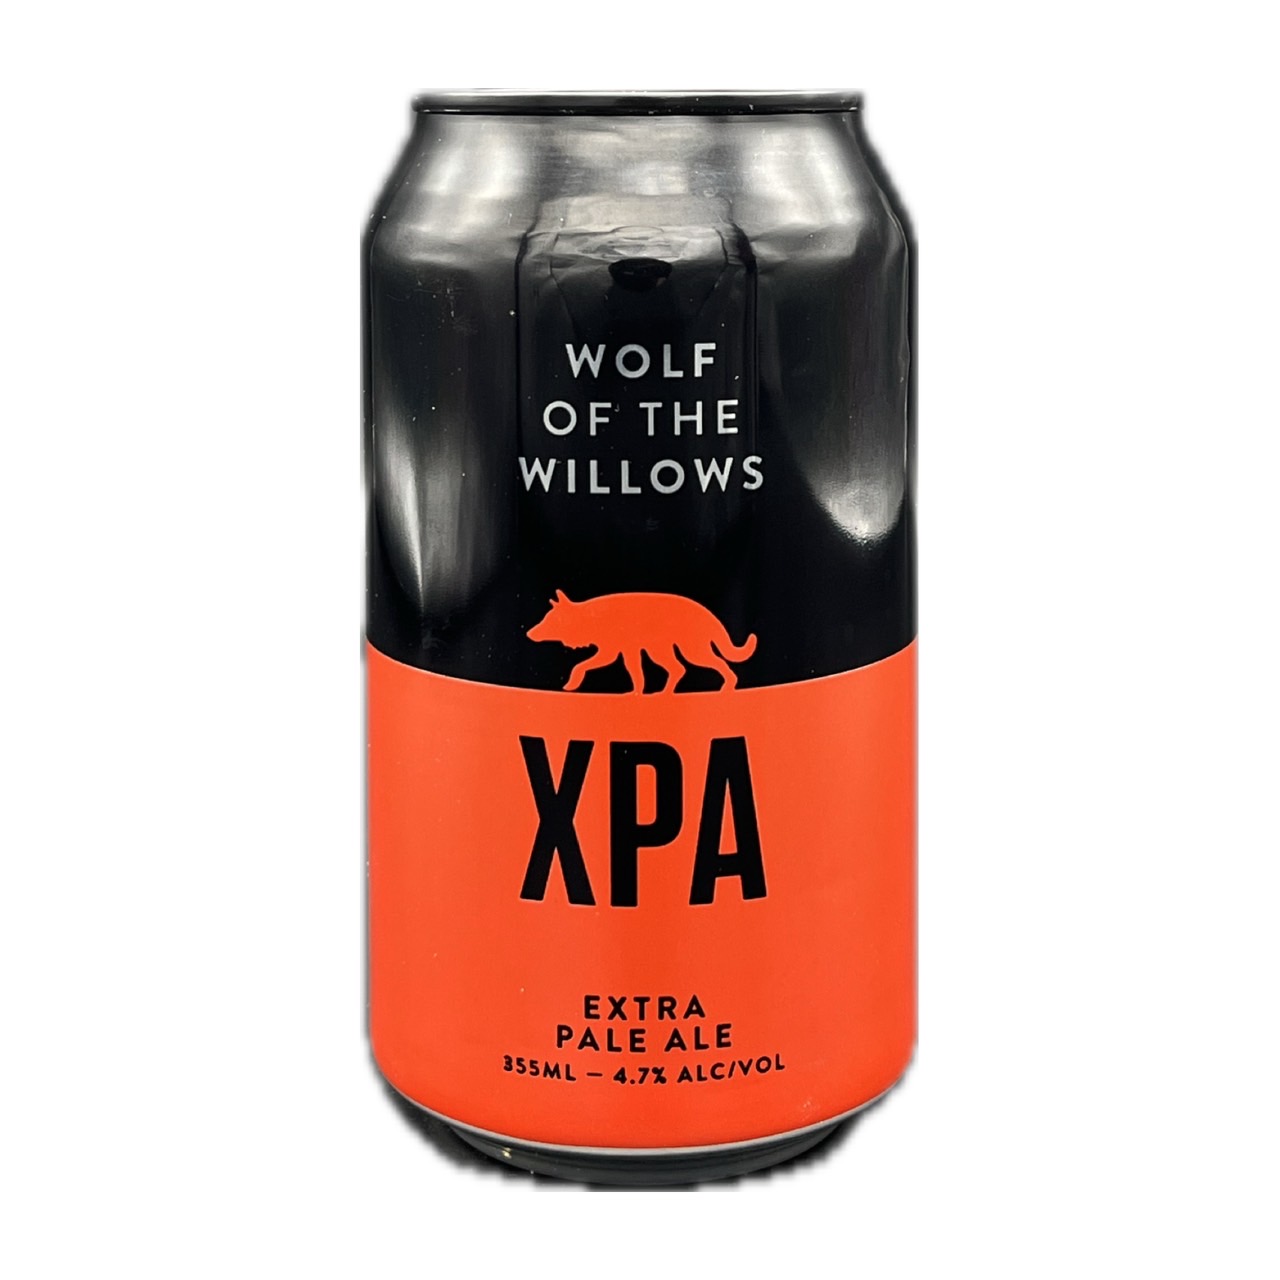 ☆XPA/Wolf of the willows